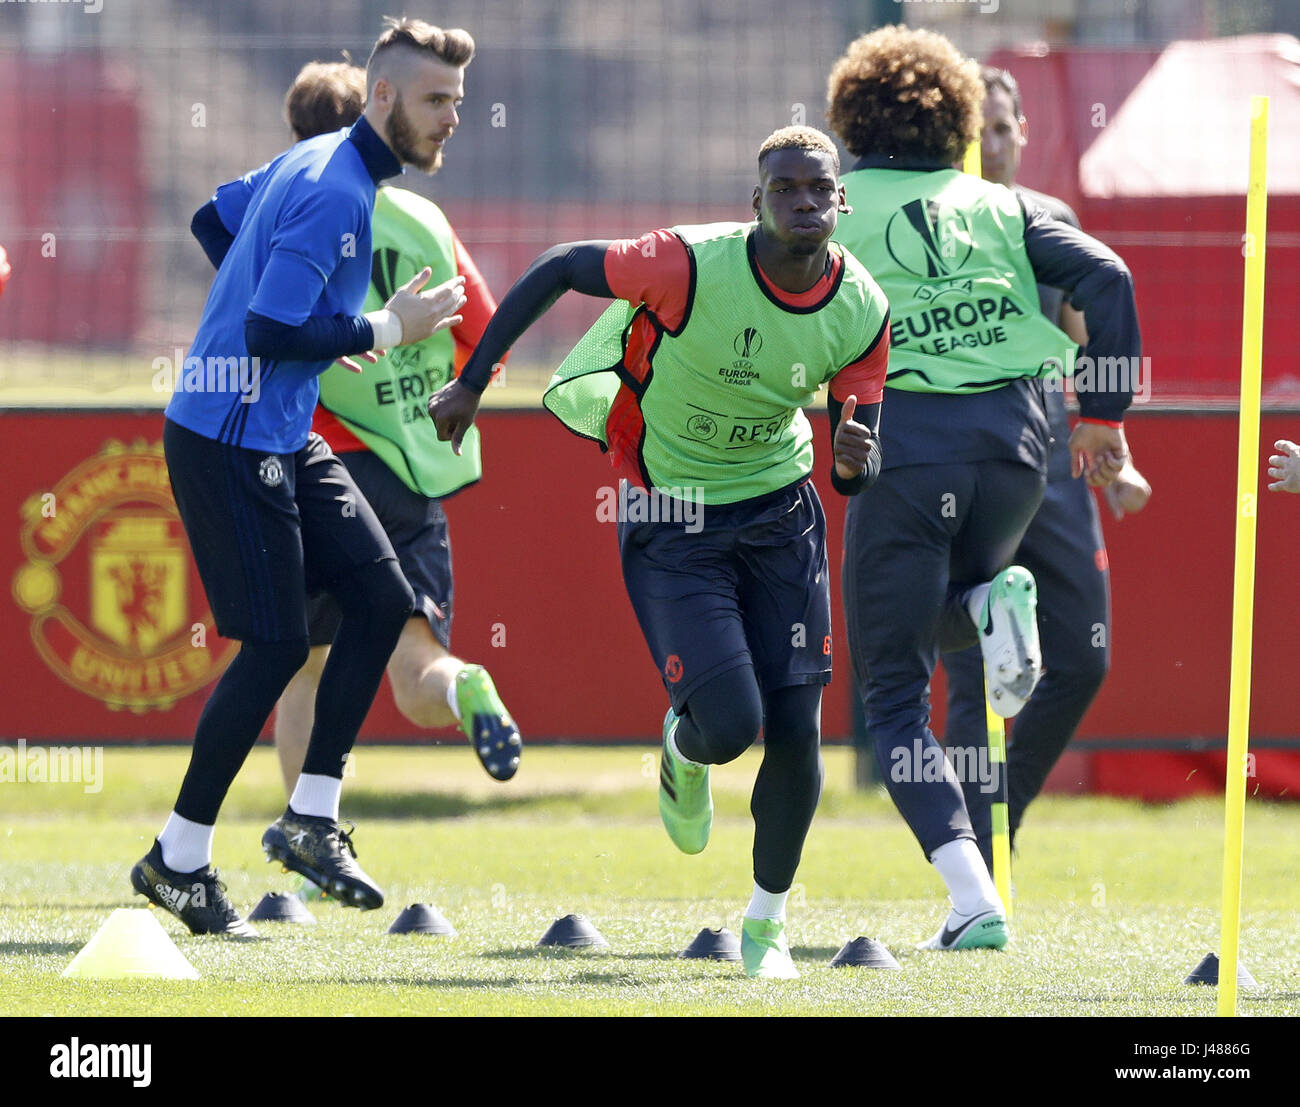 Manchester United's Paul Pogba during the training session at the AON Training Complex, Carrington. PRESS ASSOCIATION Photo. Picture date: Wednesday May 10, 2017. See PA story SOCCER Man Utd. Photo credit should read: Martin Rickett/PA Wire Stock Photo